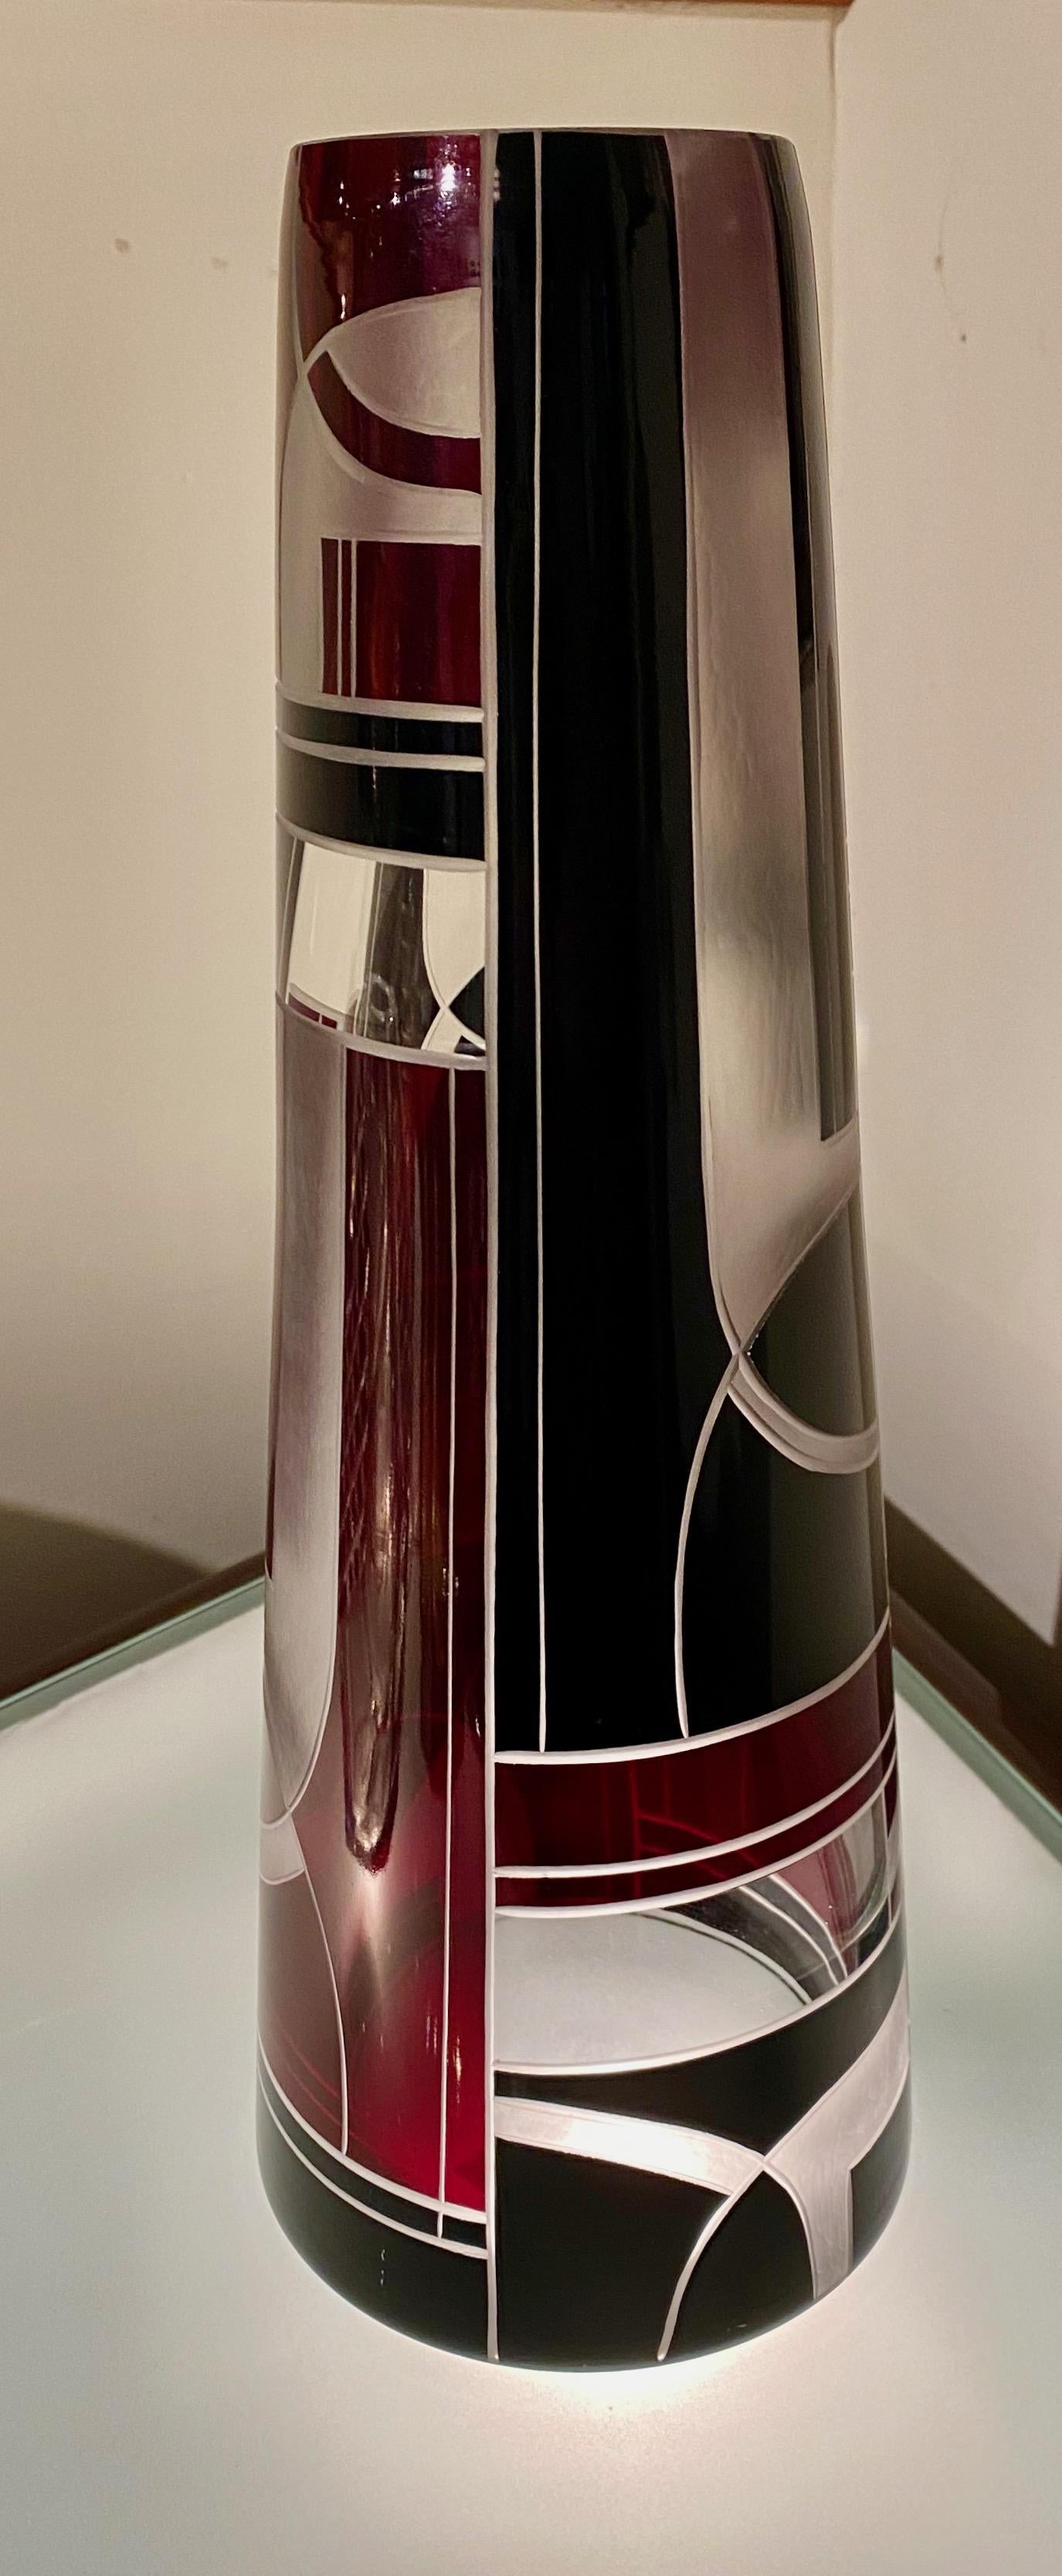 Art Deco black, burgundy and etched glass vase in the style of Karl Palda produced in Czechoslovakia in the 1930s. Large and thick walled glass. A stunning, a piece of “jewelry for your home” and a perfect example of the high style that was